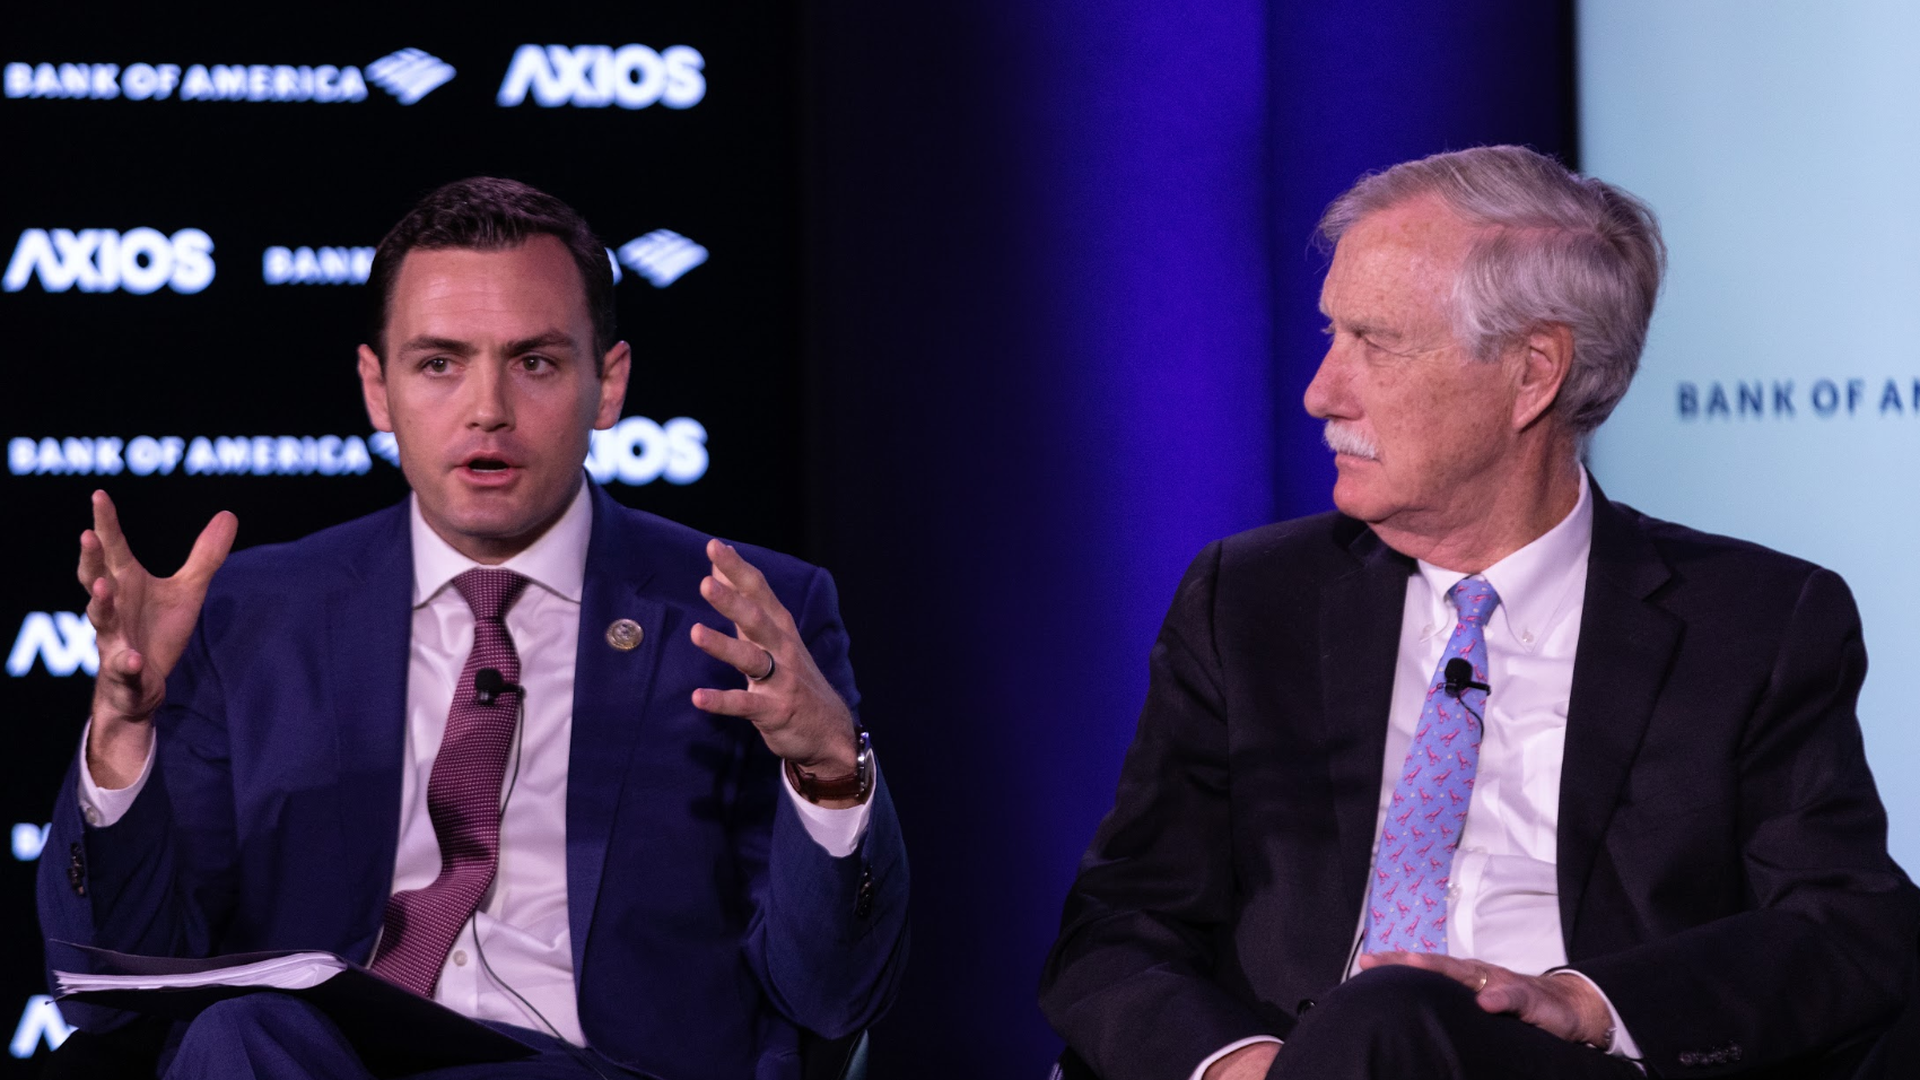 Left, Rep. Mike Gallagher, Right, Sen. Angus King both seated on the Axios stage.